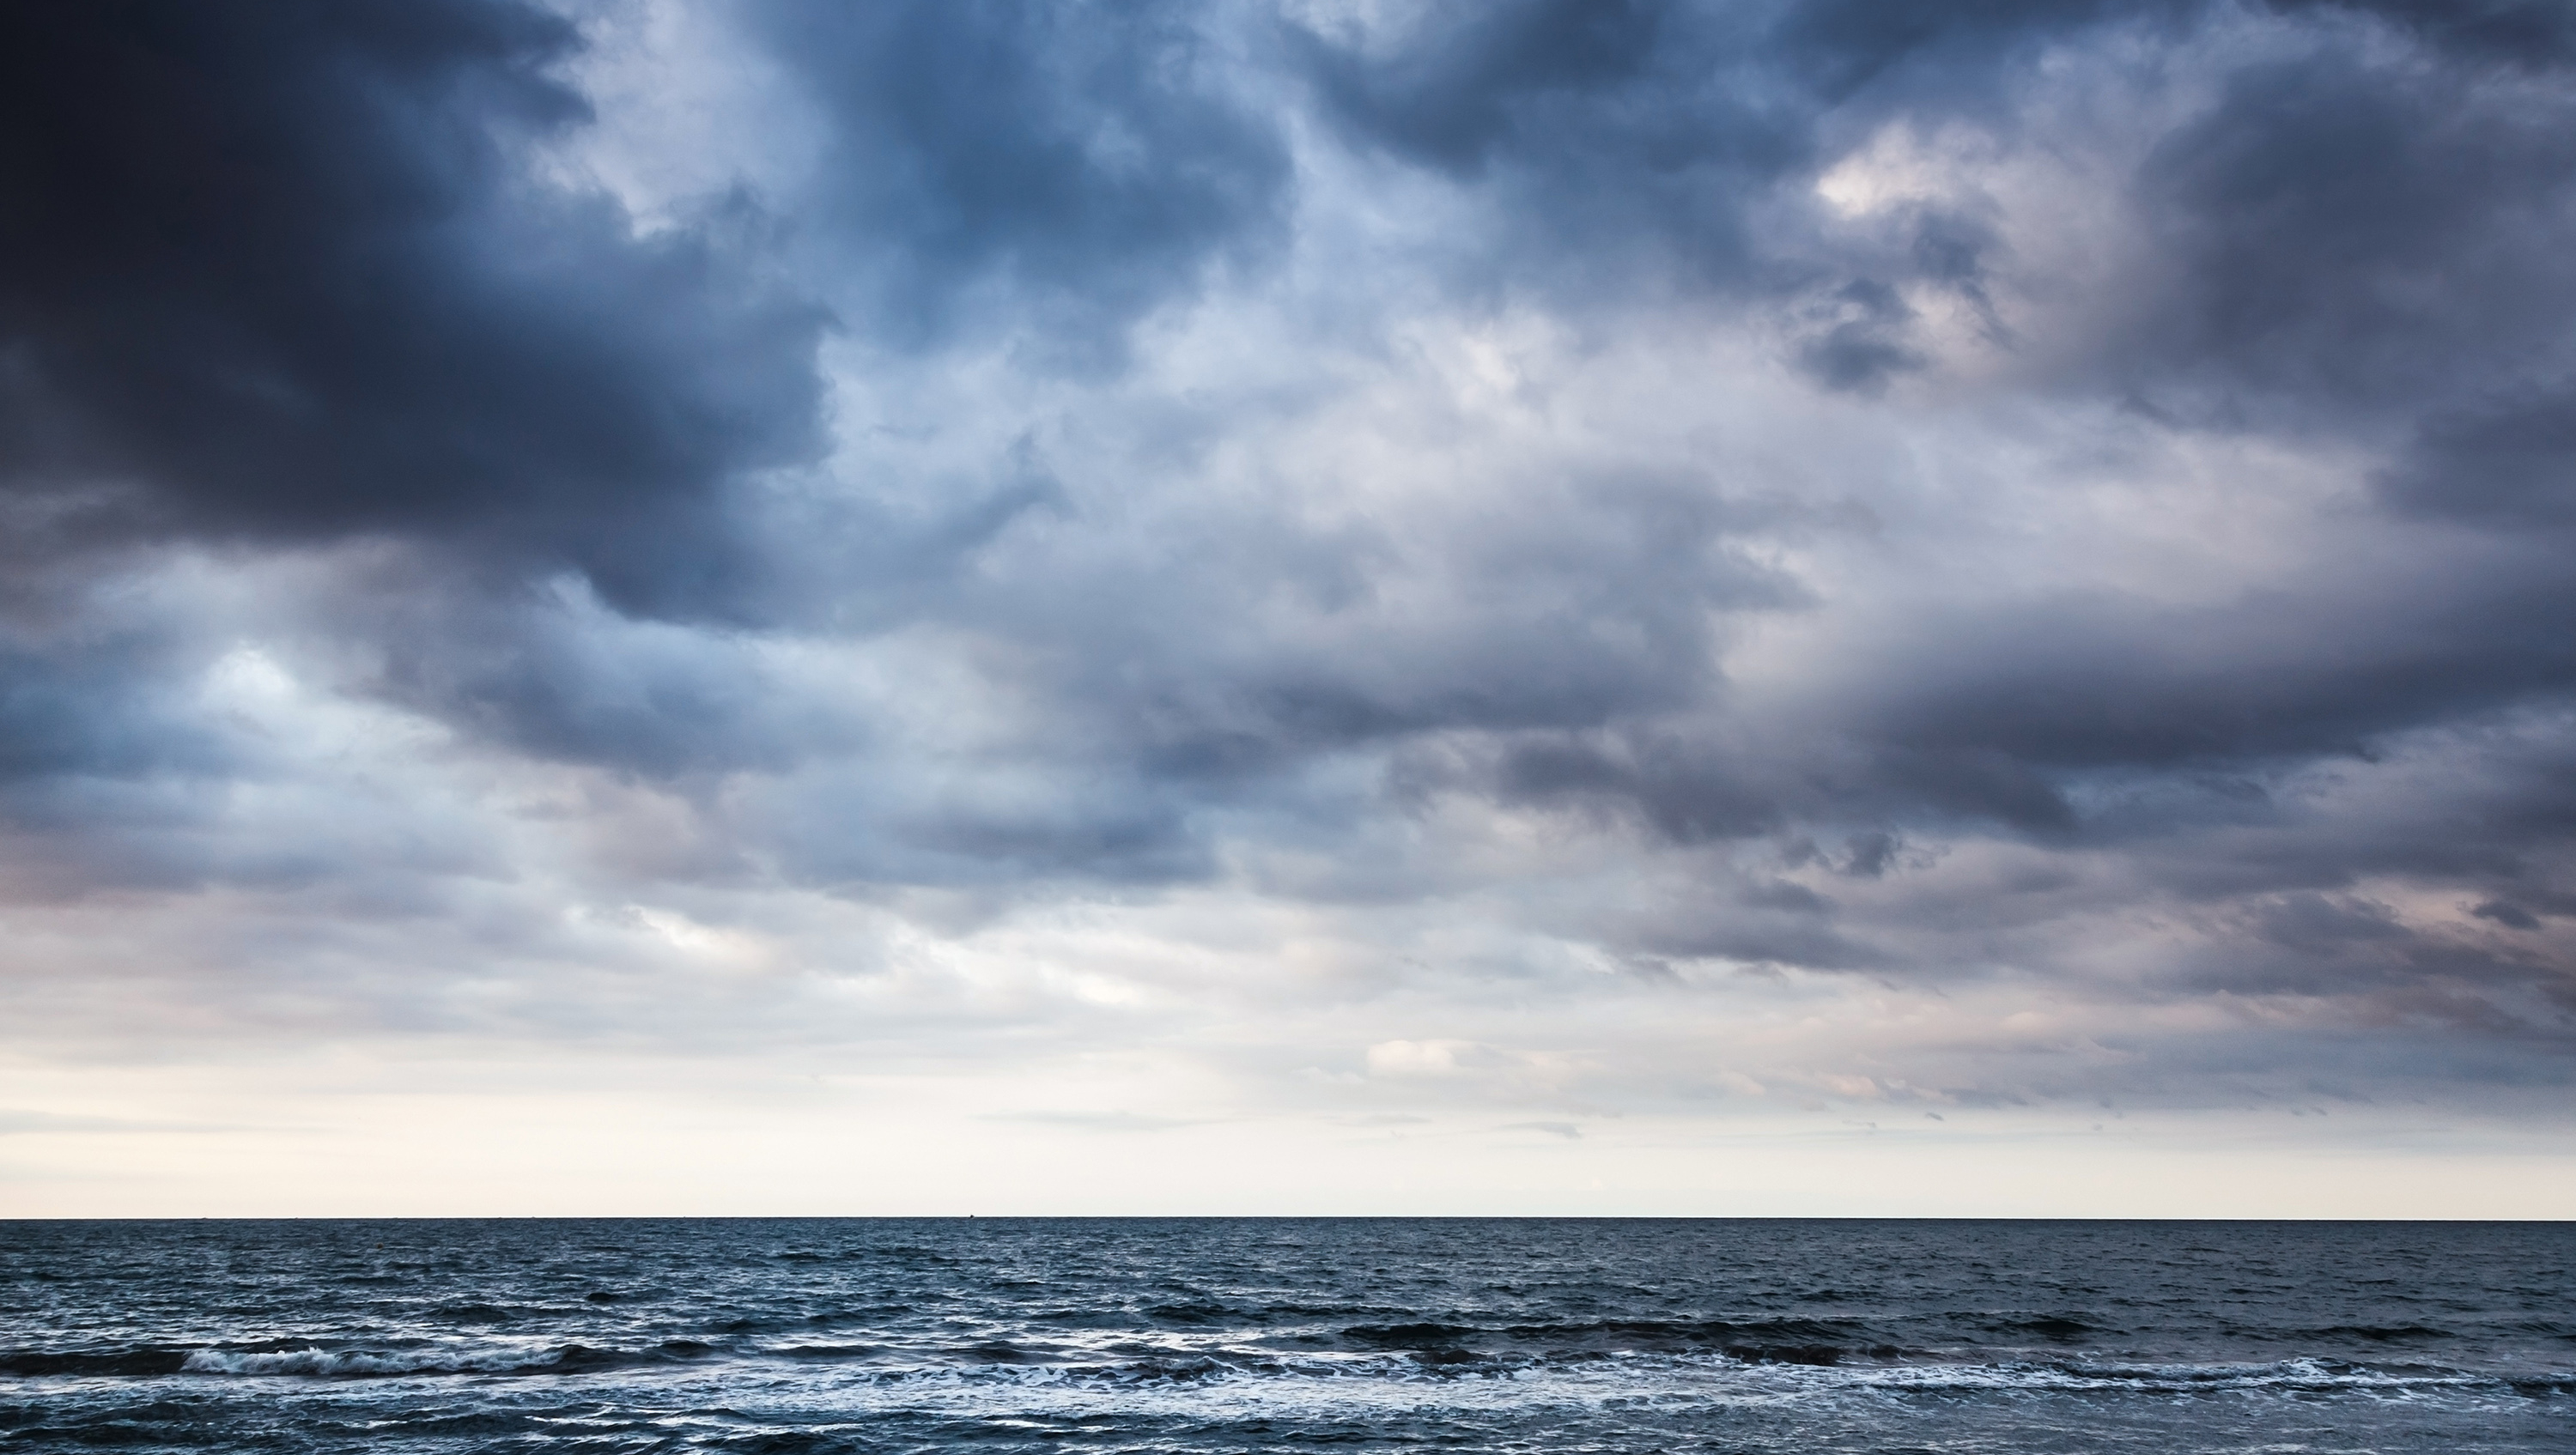 A stormy sky over the sea